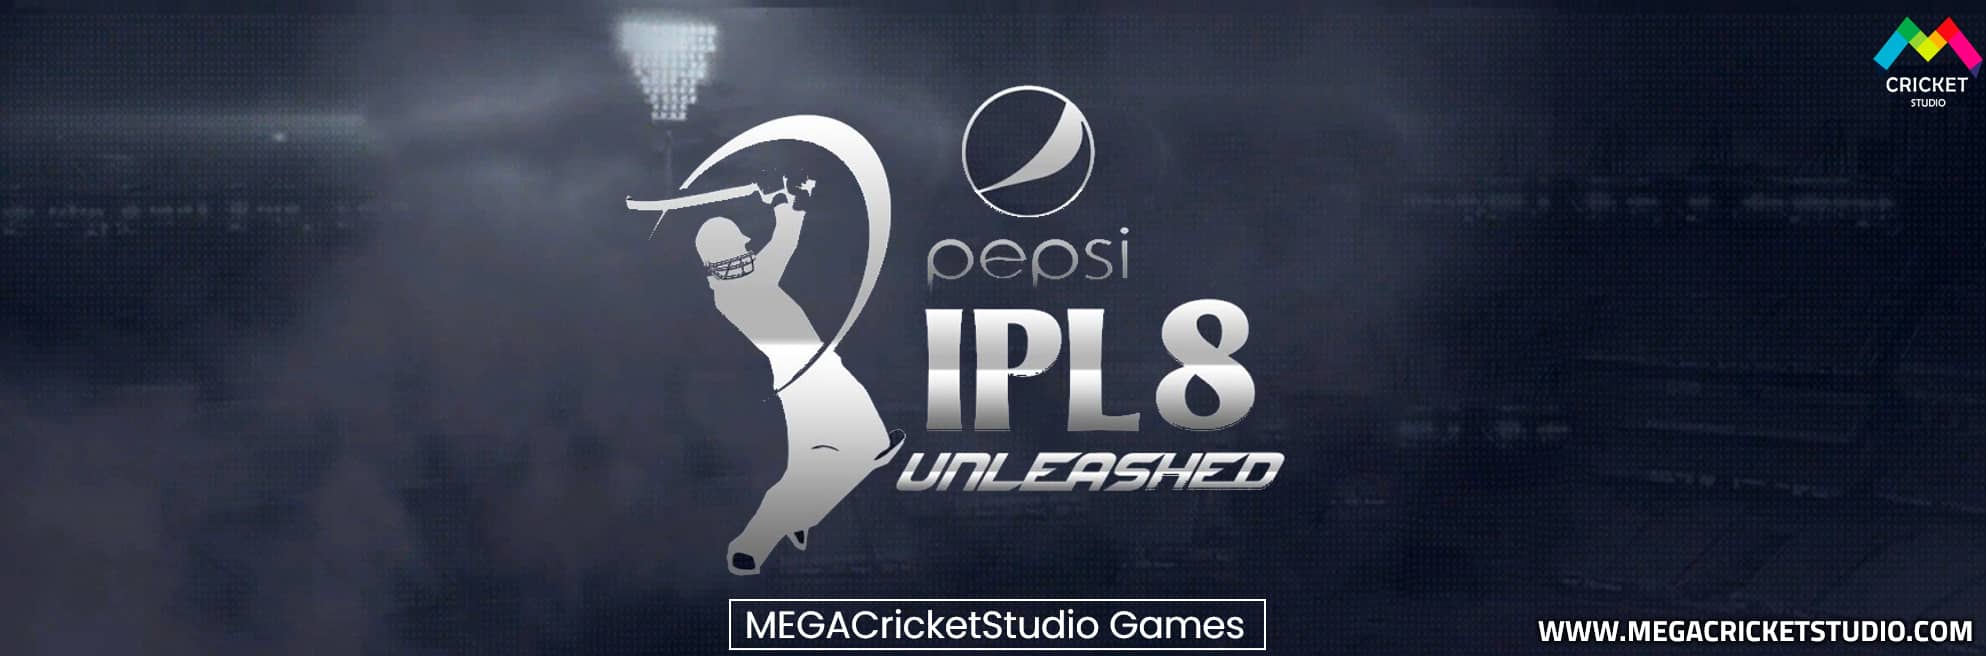 PEPSI IPL 08 UNLEASHED Patch for EA Cricket 07